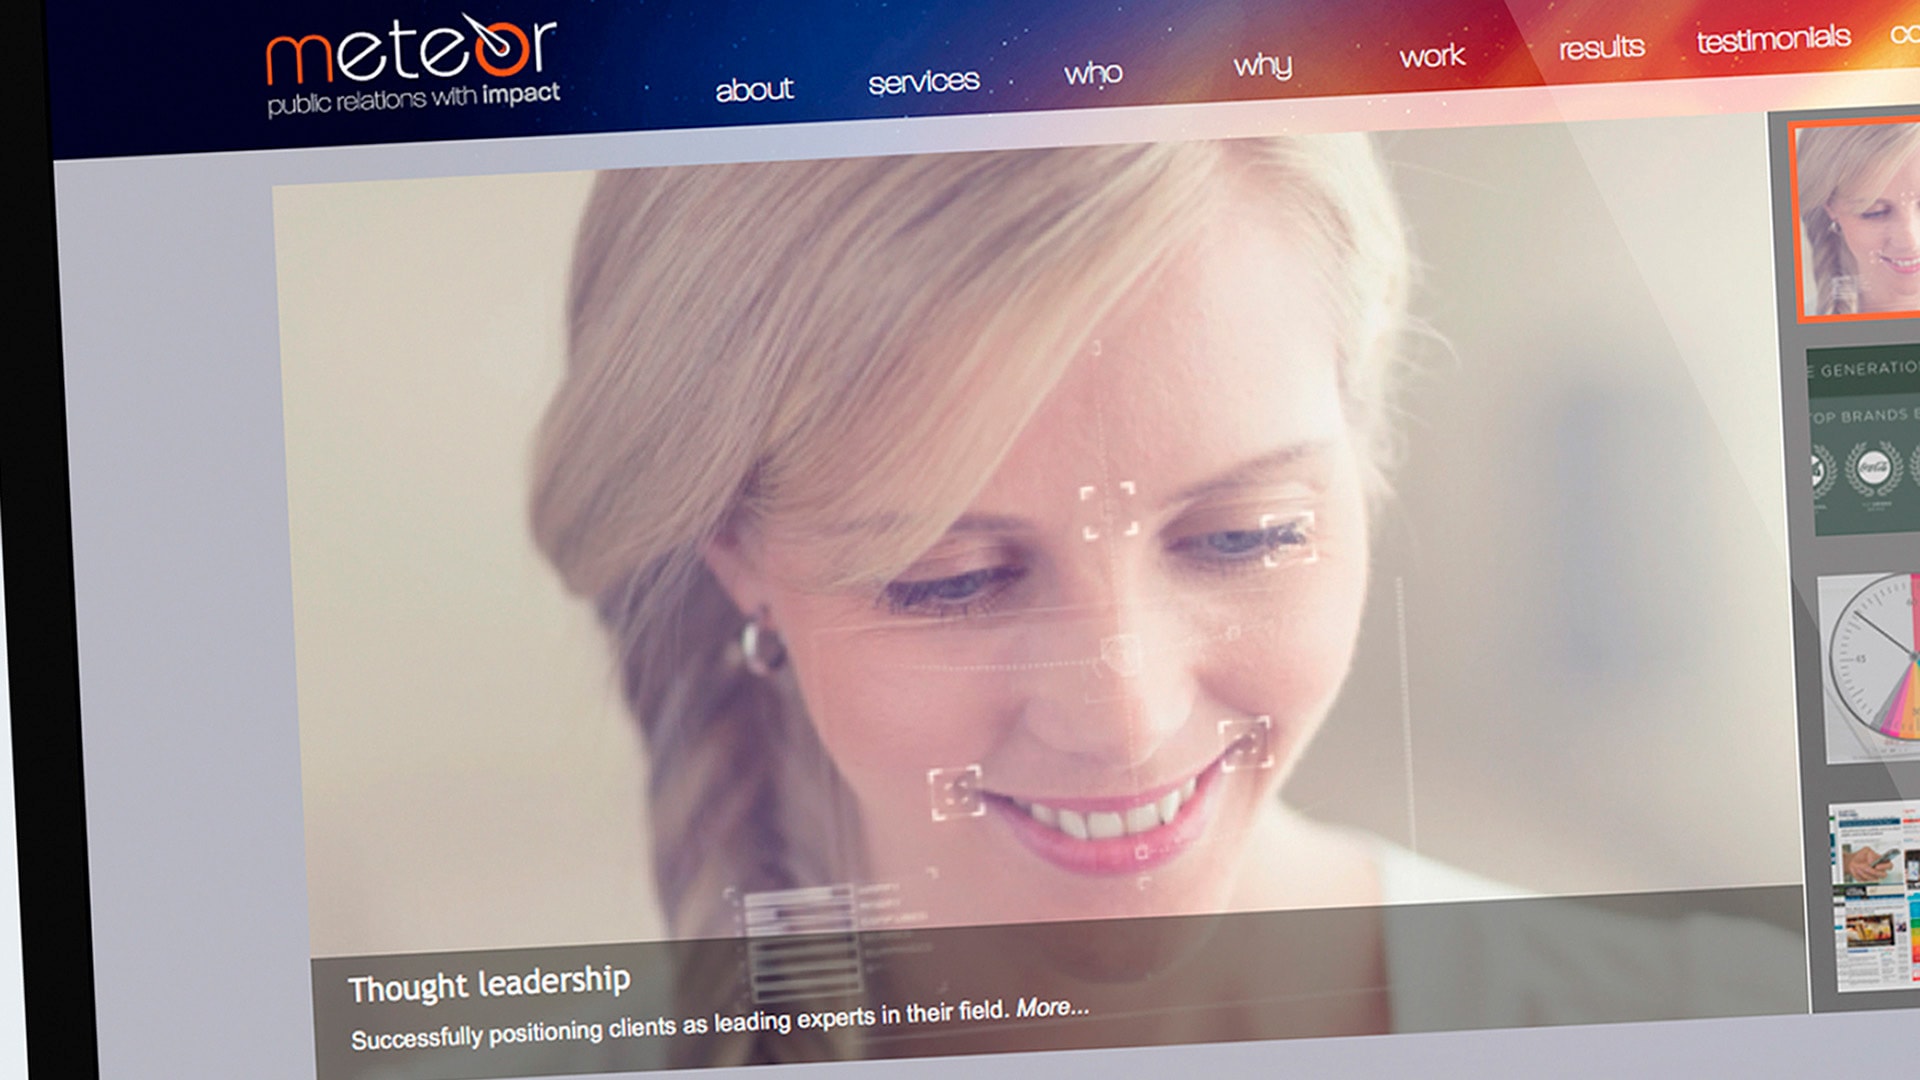 A computer screen displaying the Meteor Website Menu and homepage with an image of a woman smiling and Meteor logo displayed.